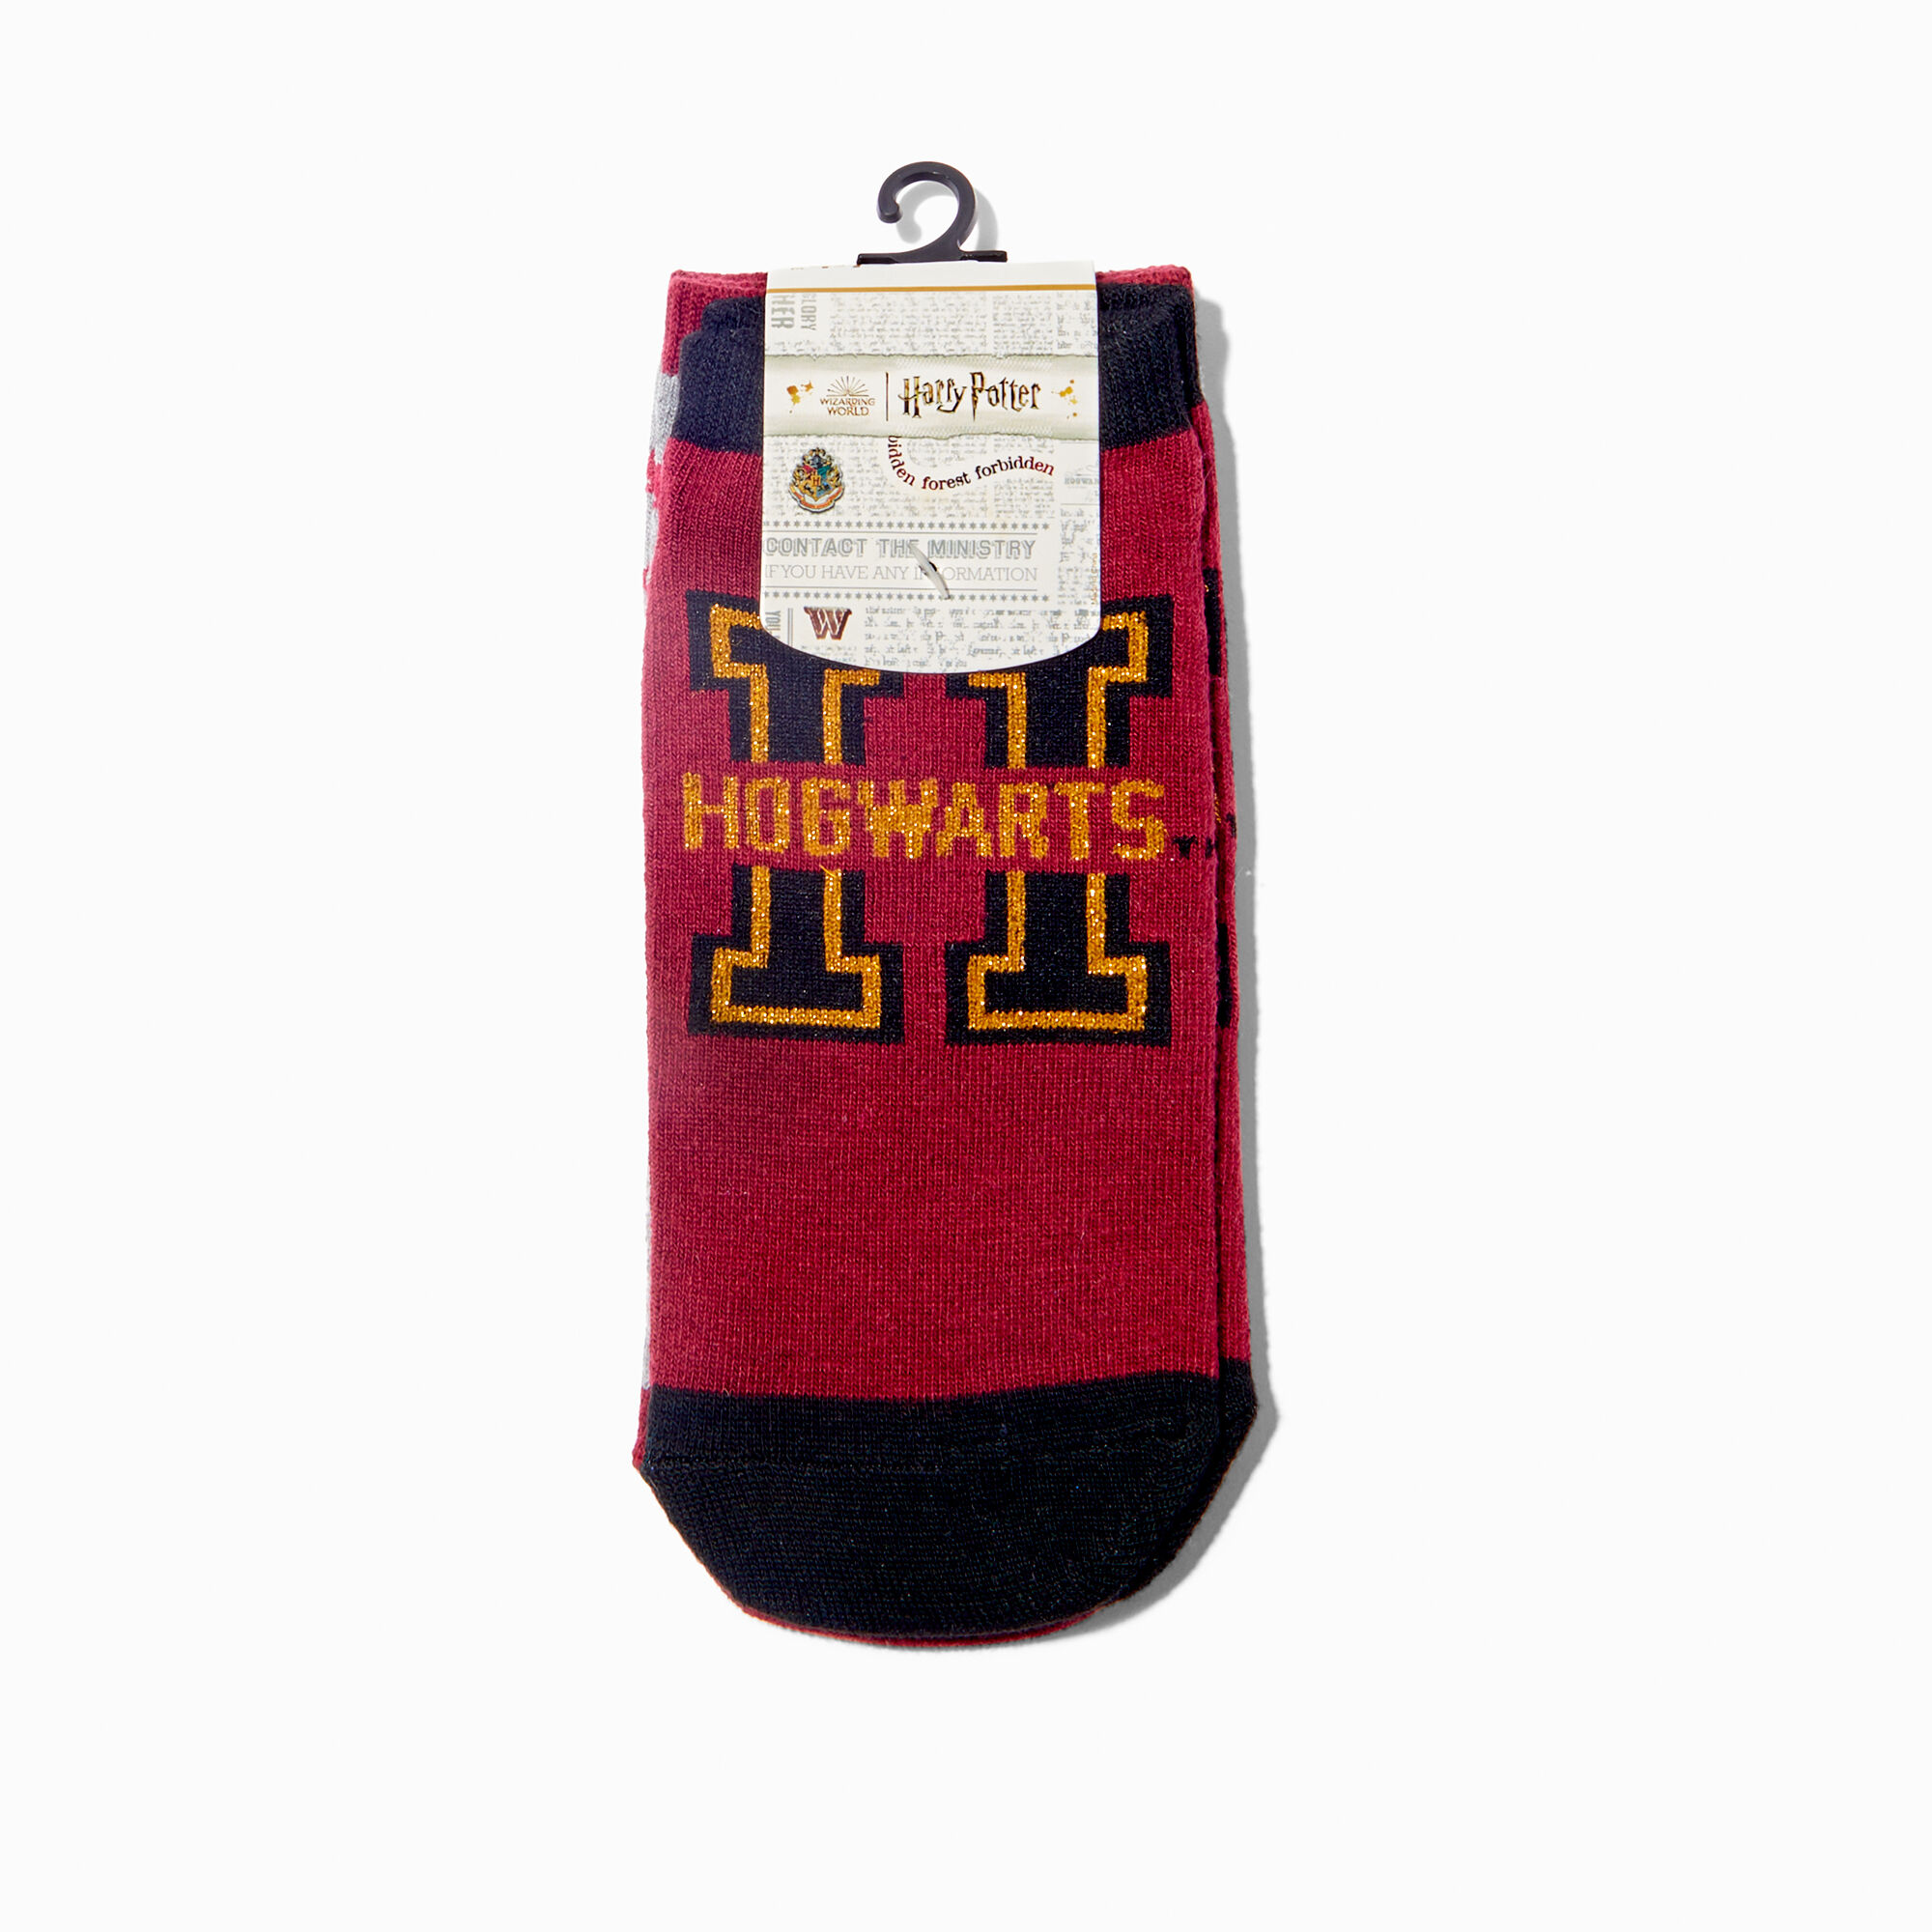 View Claires Harry Potter Hogwarts Ankle Socks 2 Pack information